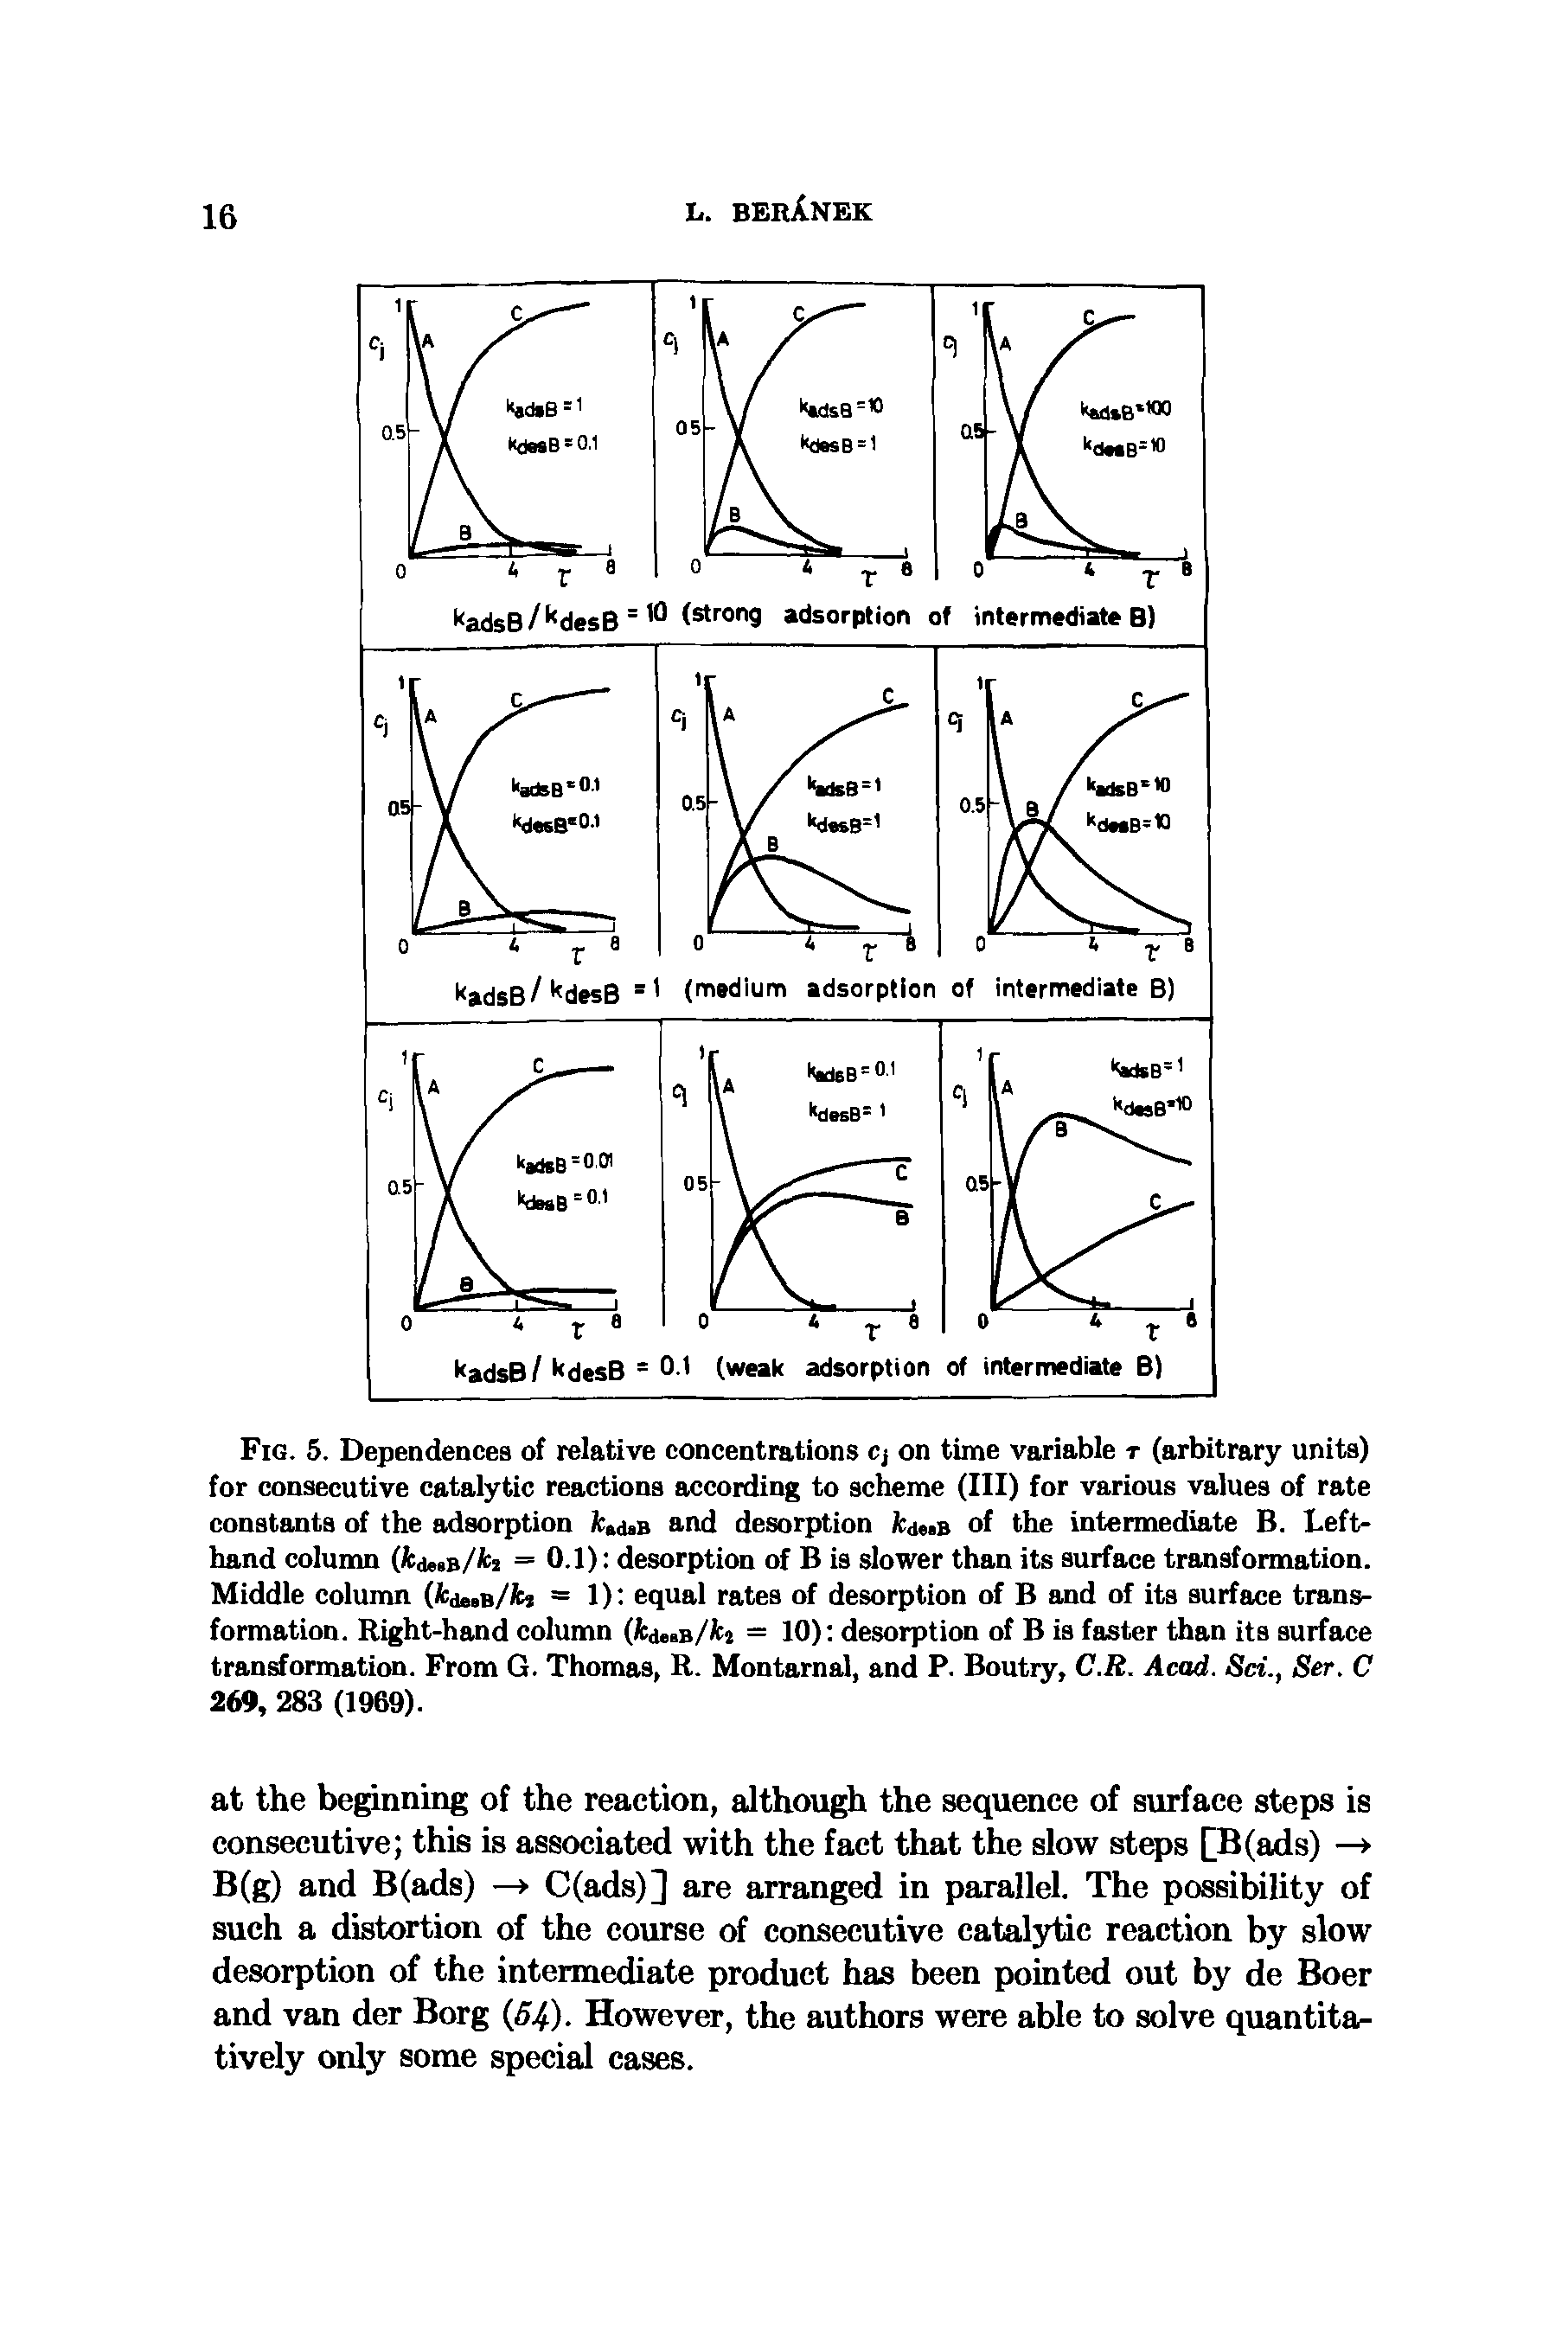 Fig. 5. Dependences of relative concentrations Cj on time variable r (arbitrary units) for consecutive catalytic reactions according to scheme (III) for various values of rate constants of the adsorption k,(ub and desorption fcduB of the intermediate B. Left-hand column (fcdesB/fcs = 0.1) desorption of B is slower than its surface transformation. Middle column (fcde.B/fcs = 1) equal rates of desorption of B and of its surface transformation. Right-hand column (fcdesB/fcj = 10) desorption of B is faster than its surface transformation. From G. Thomas, R. Montarnal, and P. Boutry, C.R. Acad. Sri., Ser. C 269, 283 (1969).